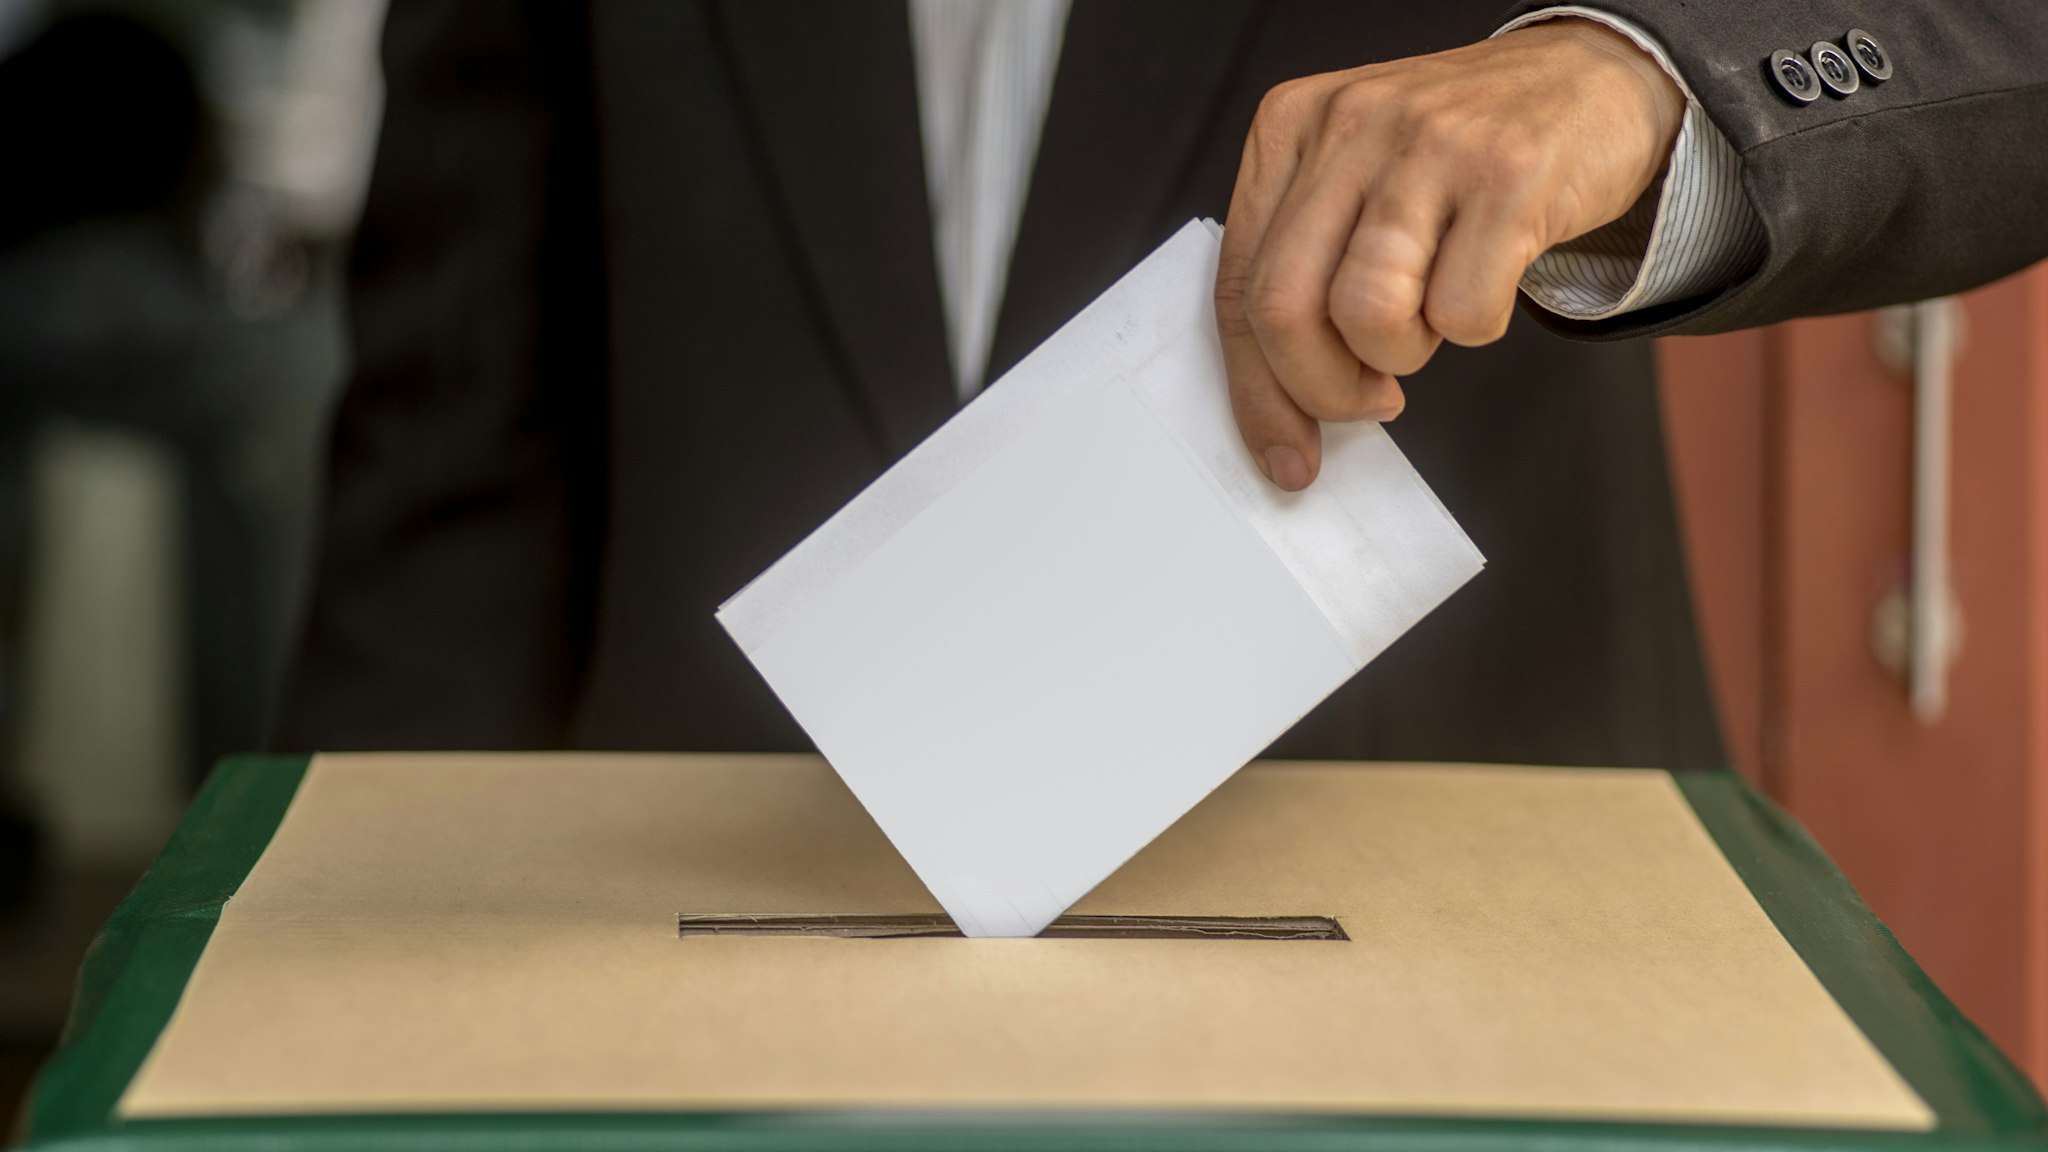 Hand of a person casting a vote into the ballot box during elections - stock photo